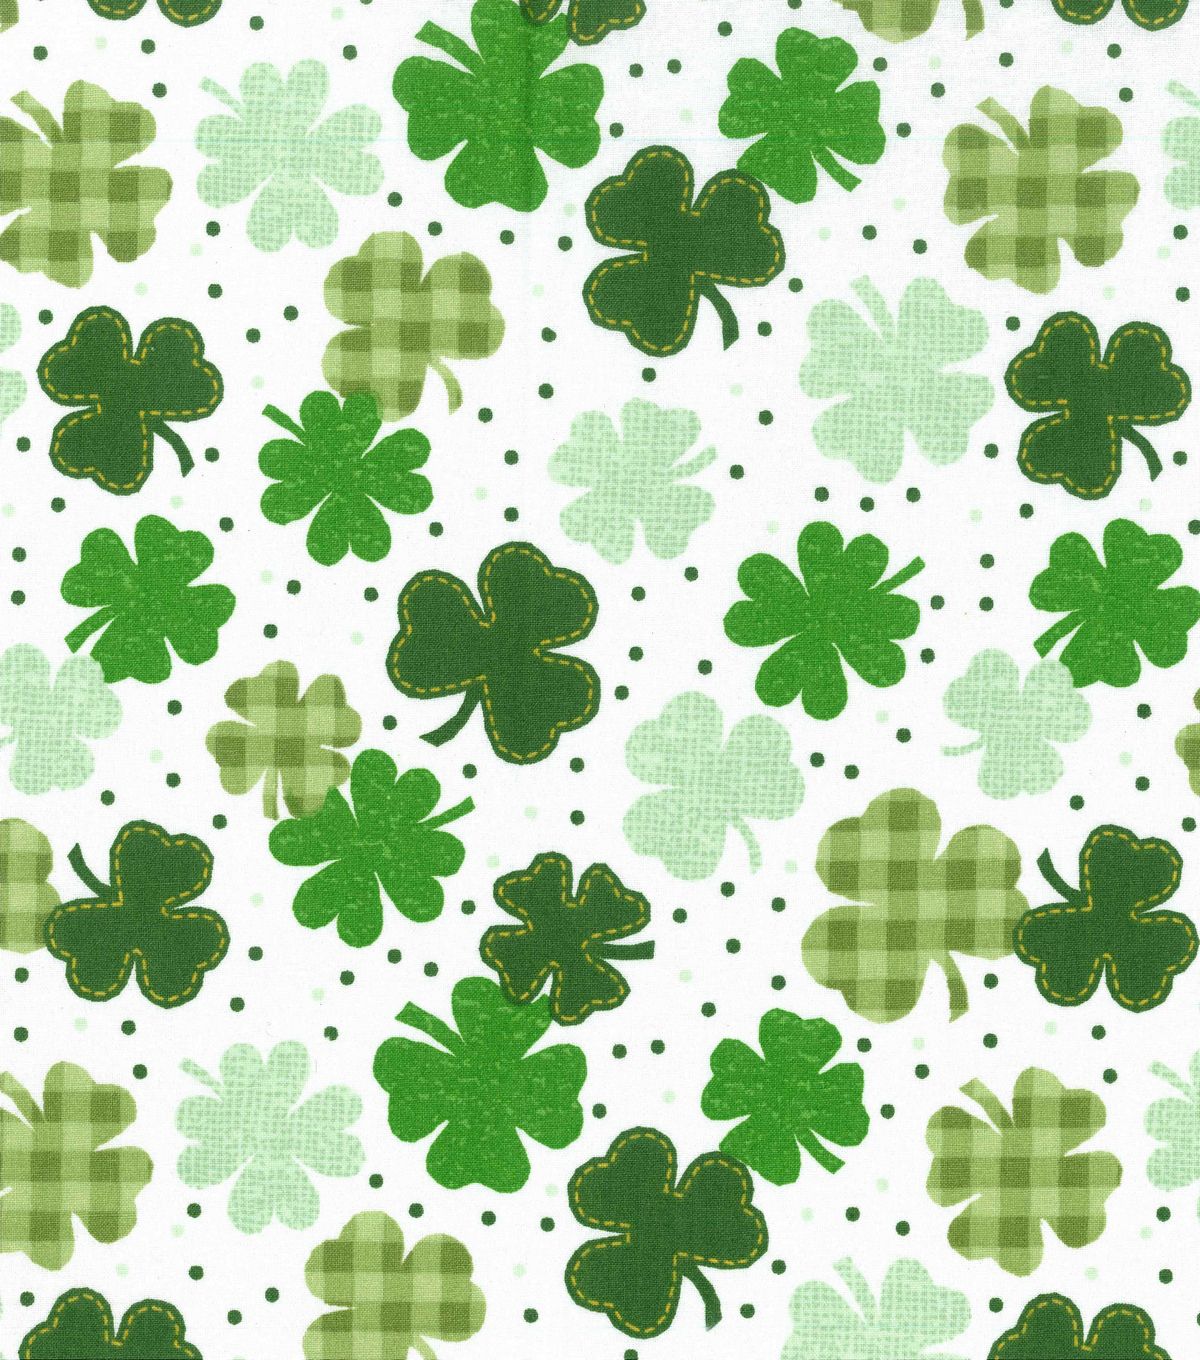 St patty's day snoopy wallpaper